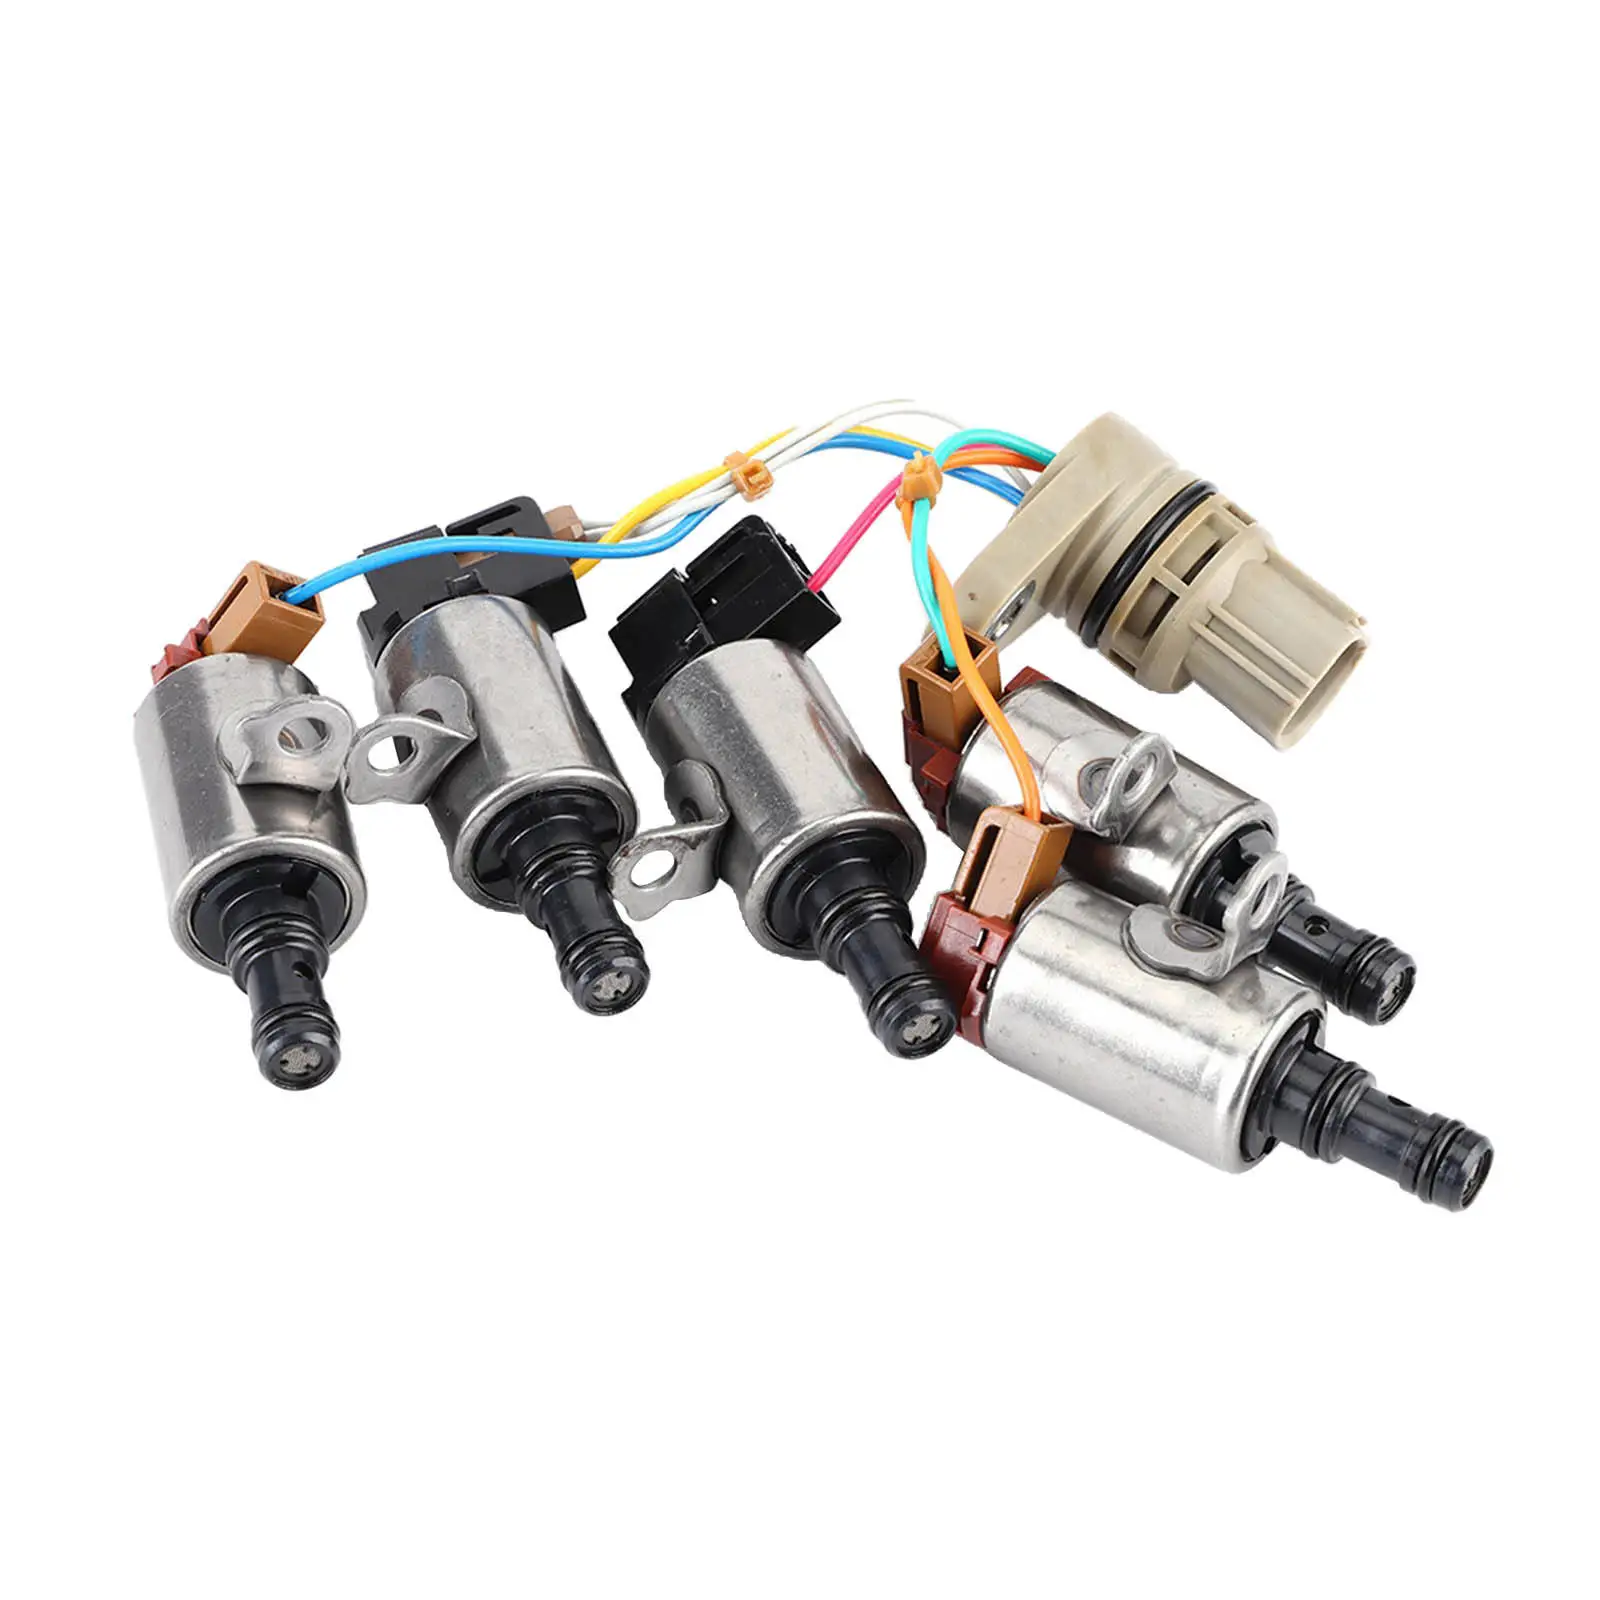 Automatic Durable Transmission Master Solenoid Set for Honda Accord  2012-2015 2002-2014 2007-2011 Replaces Accessories